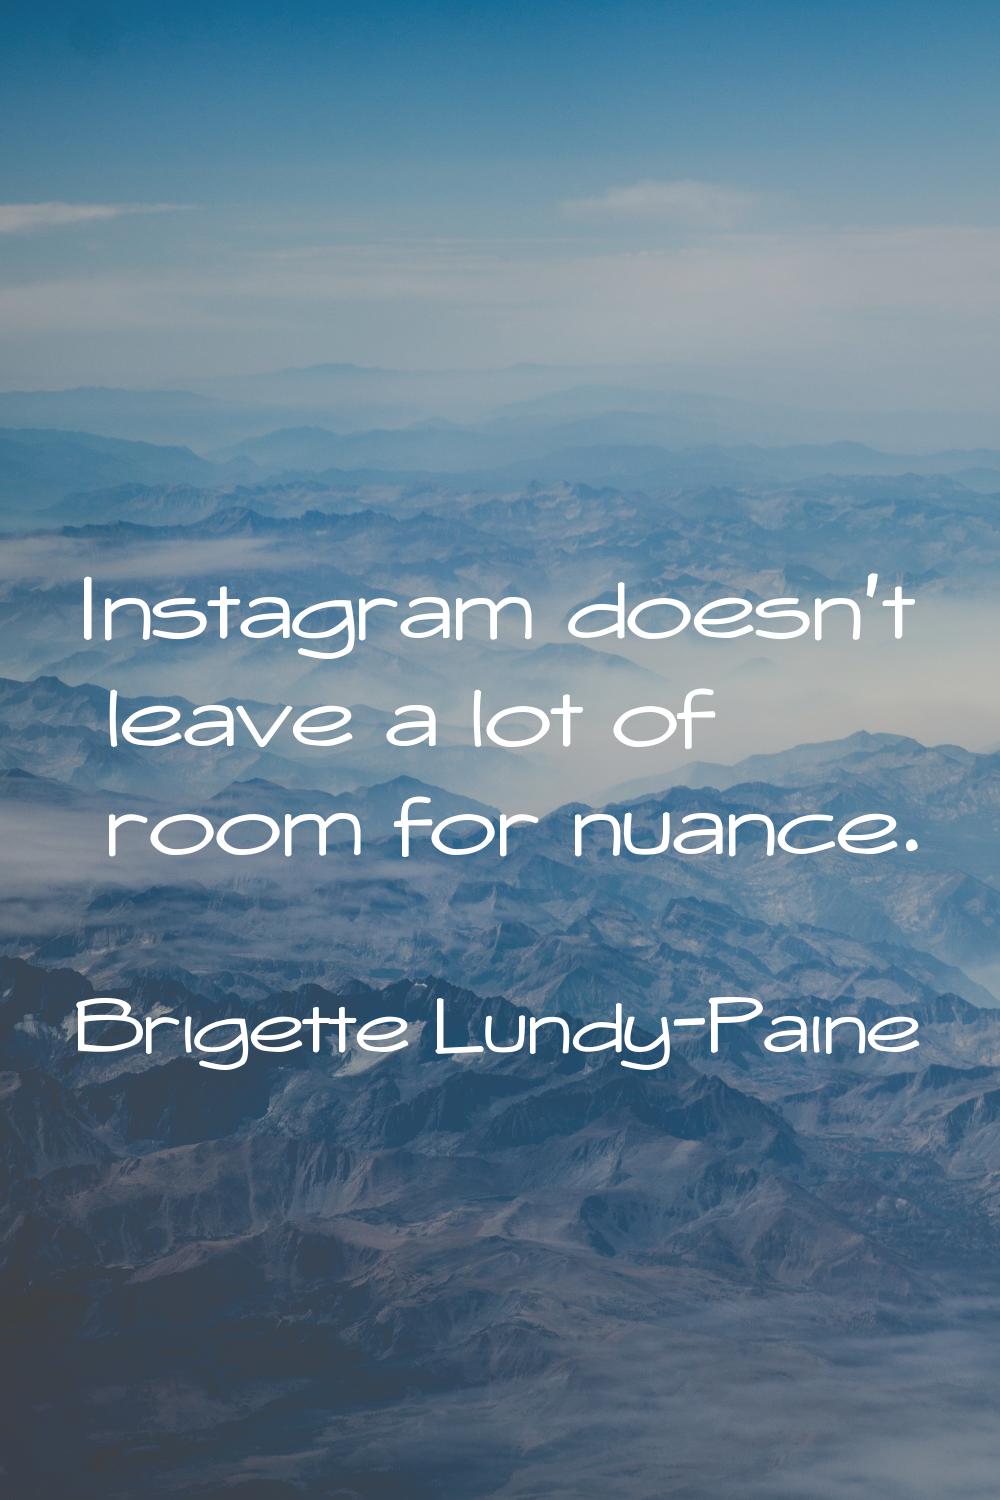 Instagram doesn't leave a lot of room for nuance.